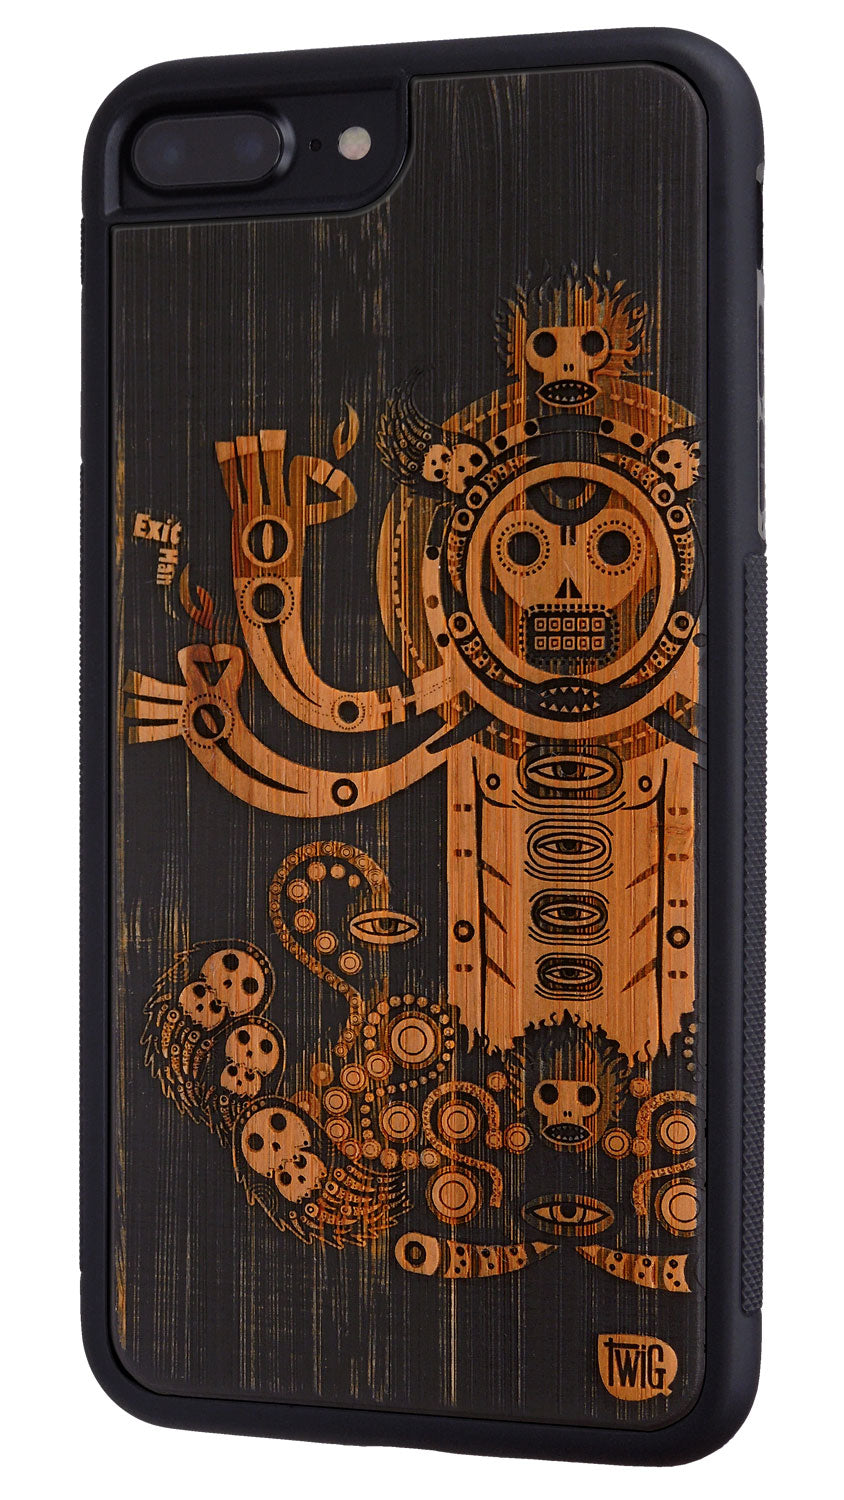 The Gate - Bamboo iPhone Case, iPhone Case - Twig Case Co.